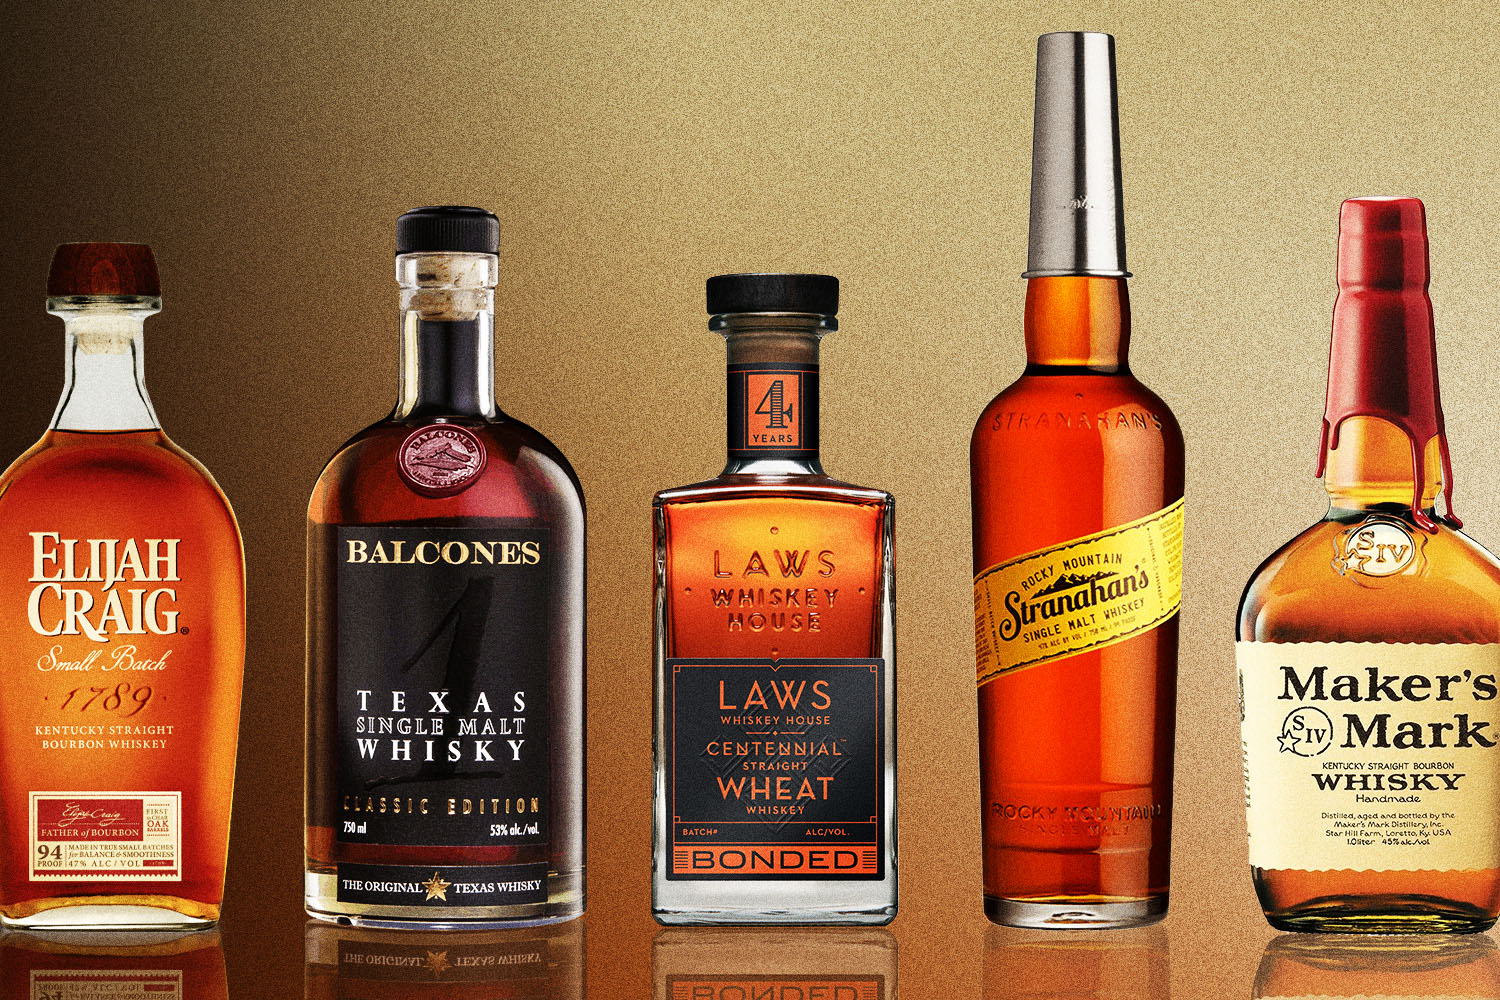 What You Need Know About The Whiskey Brands